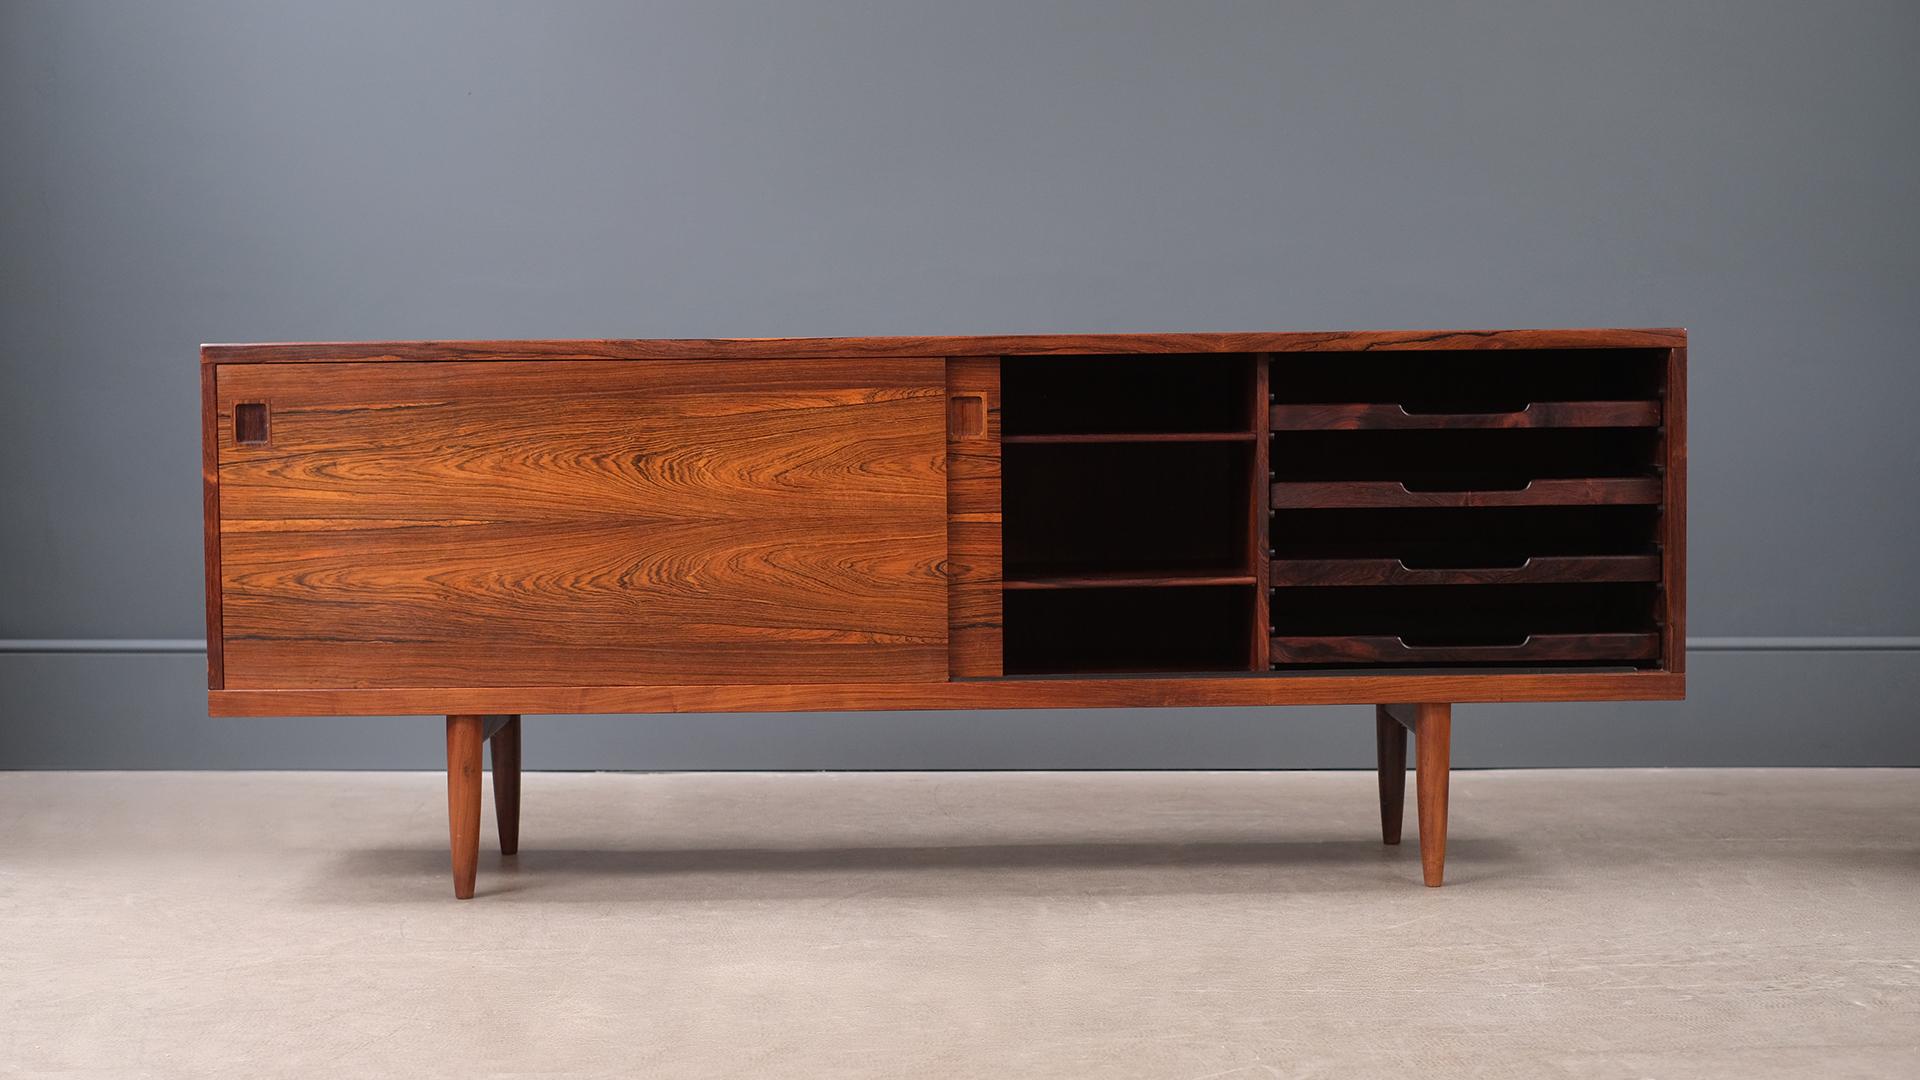 Super sought after and rare 1960s sideboard in wonderful rosewood with a staggering grain designed by Niels Moller, Denmark. Elegant proportions, simple detailing and ultra high quality piece.